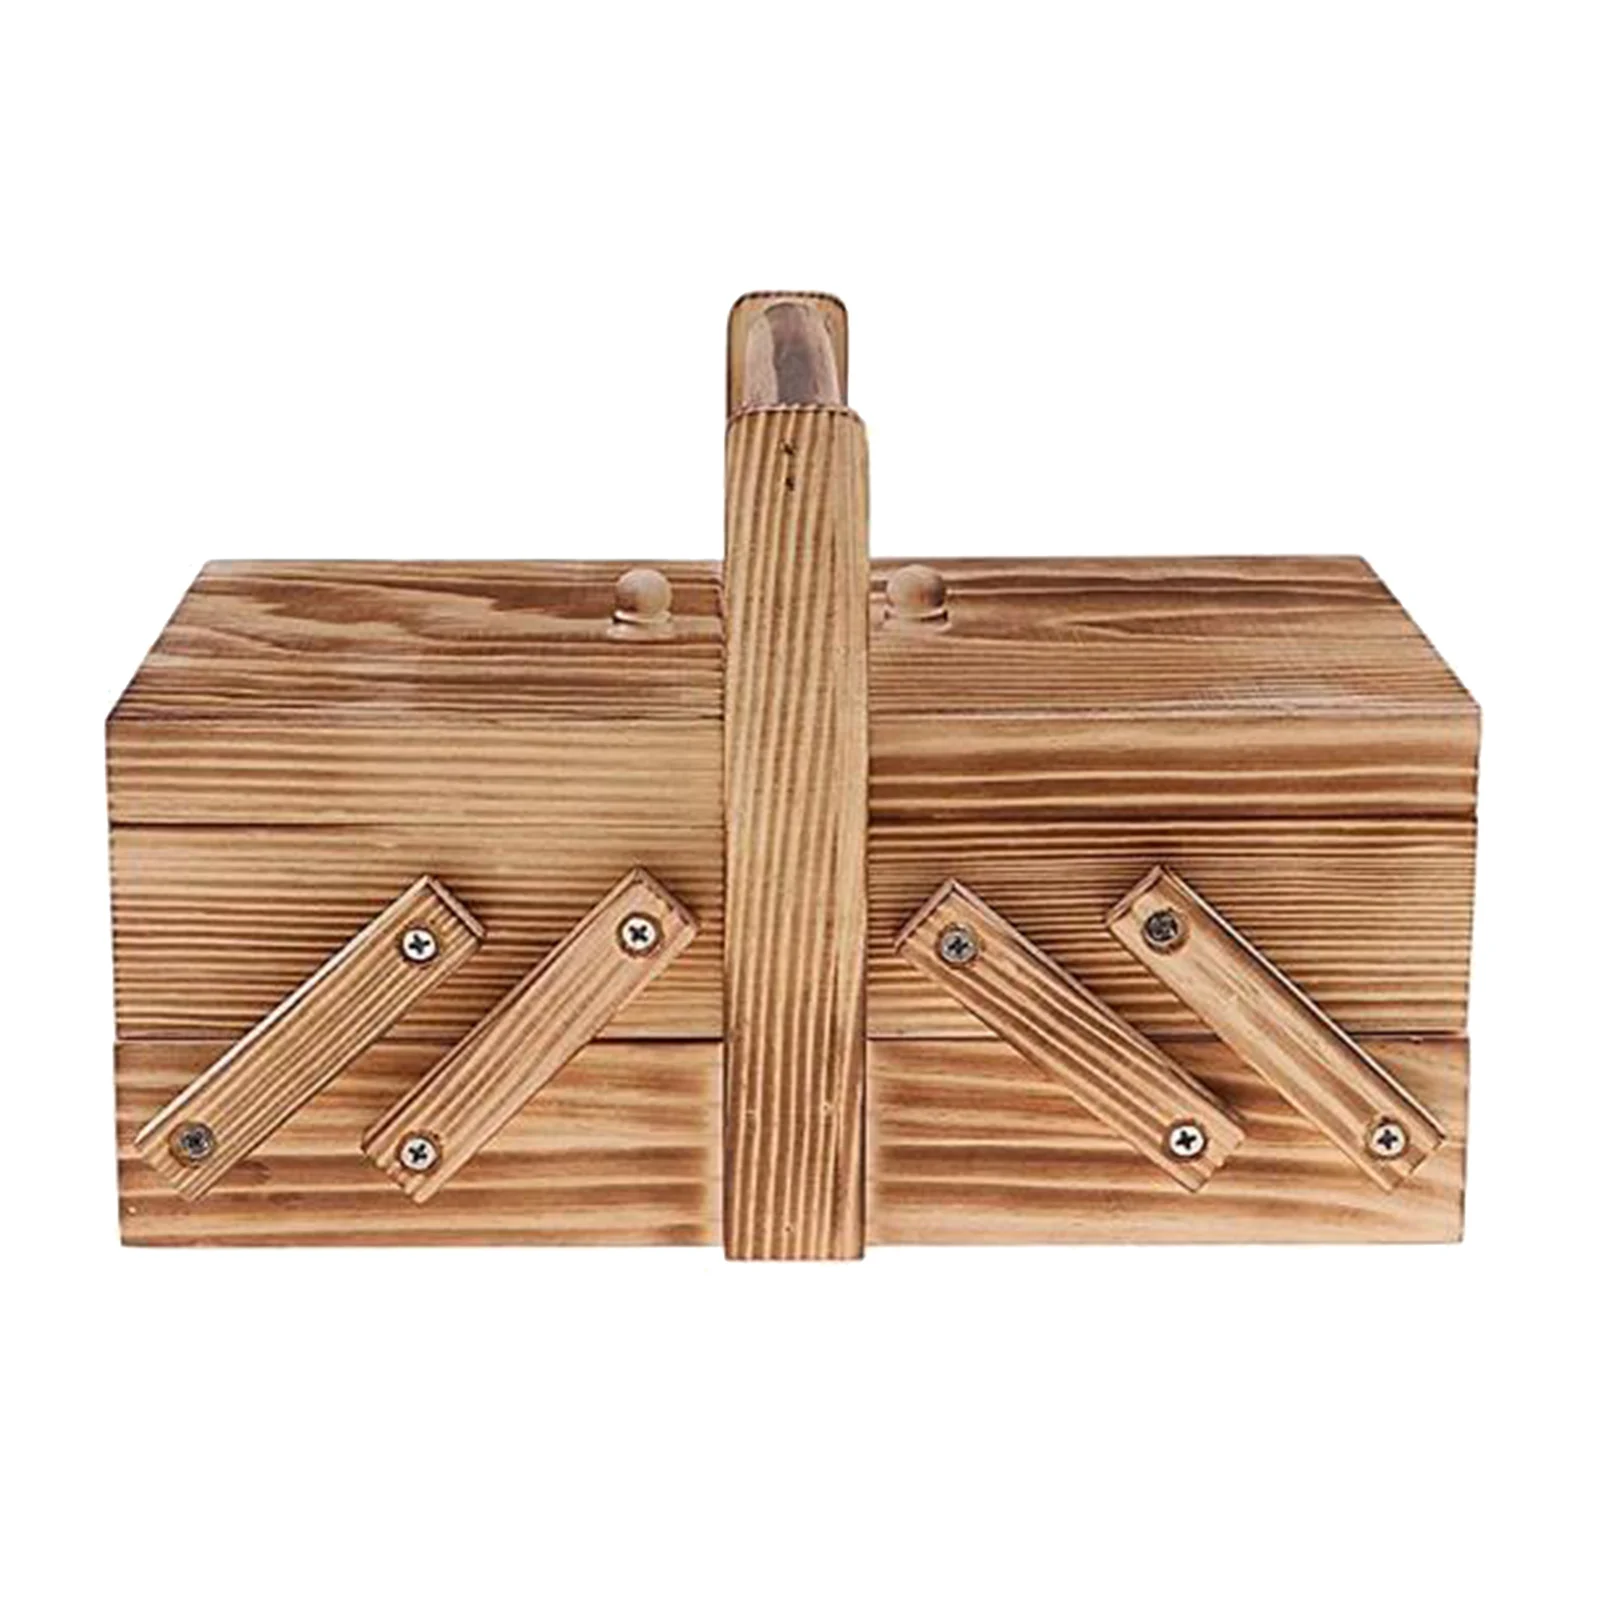 Foldable Sewing Kit Box Compartments Home Sew Basket Organizer Jewelry Boxes